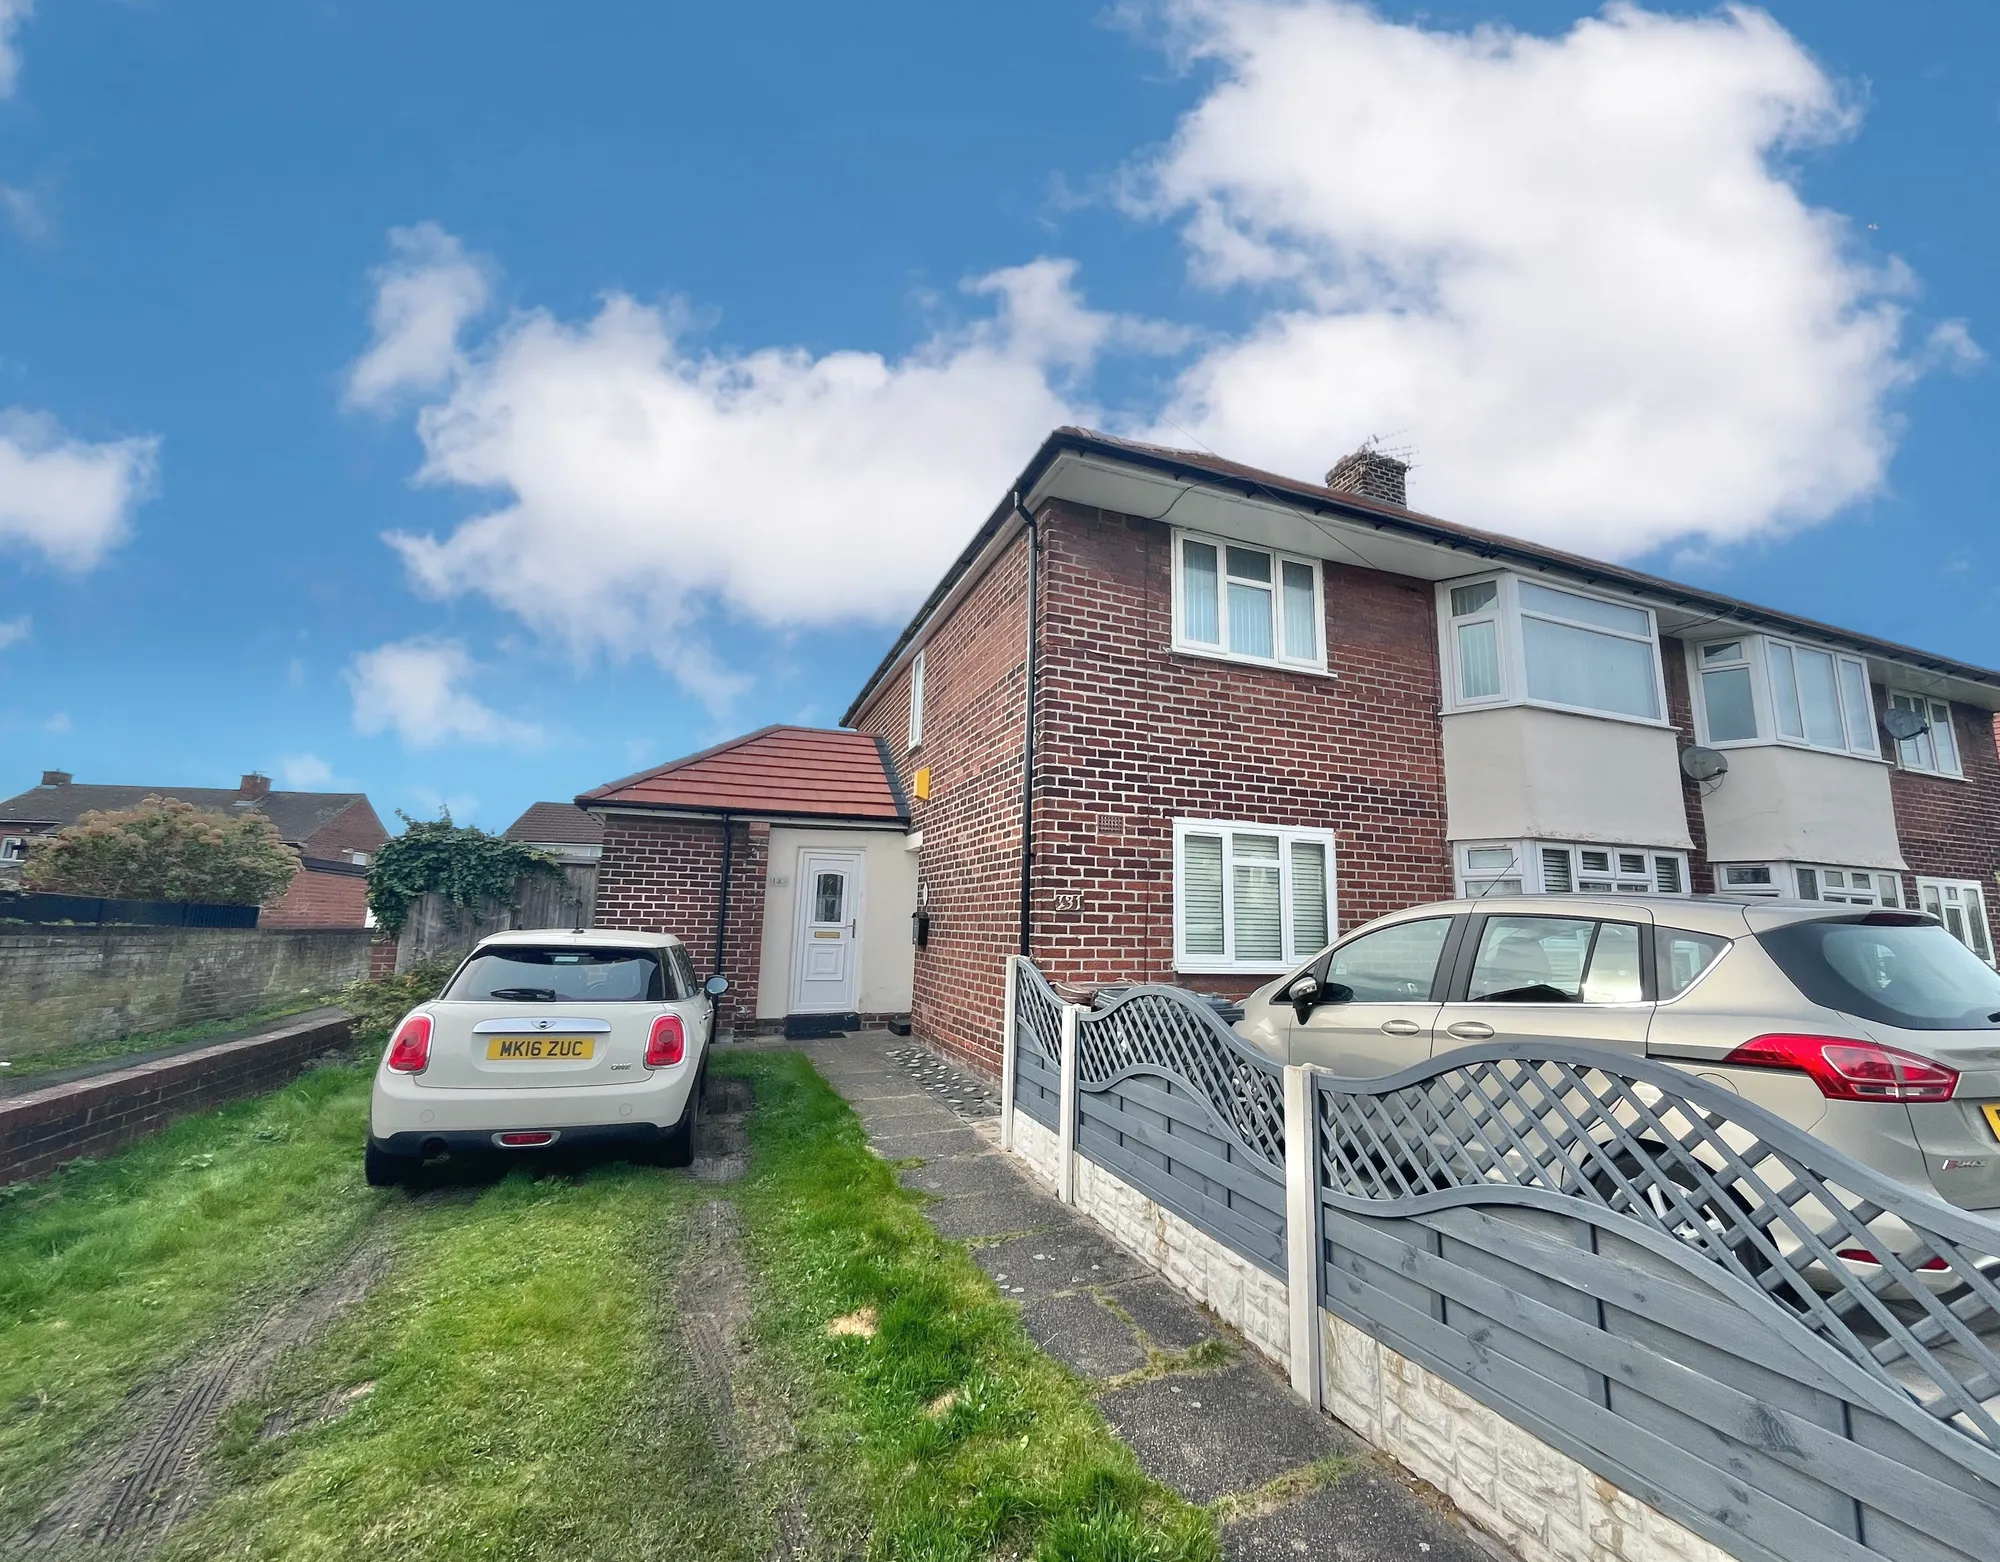 Attractive two-bedroom first-floor apartment in Maghull with open-plan living, kitchen, double bedrooms, and private lawn garden. Ideal for buy-to-let or first-time buyers. Gas central heating, double glazing, and own driveway. No chain. Enjoy serene living in a vibrant community!